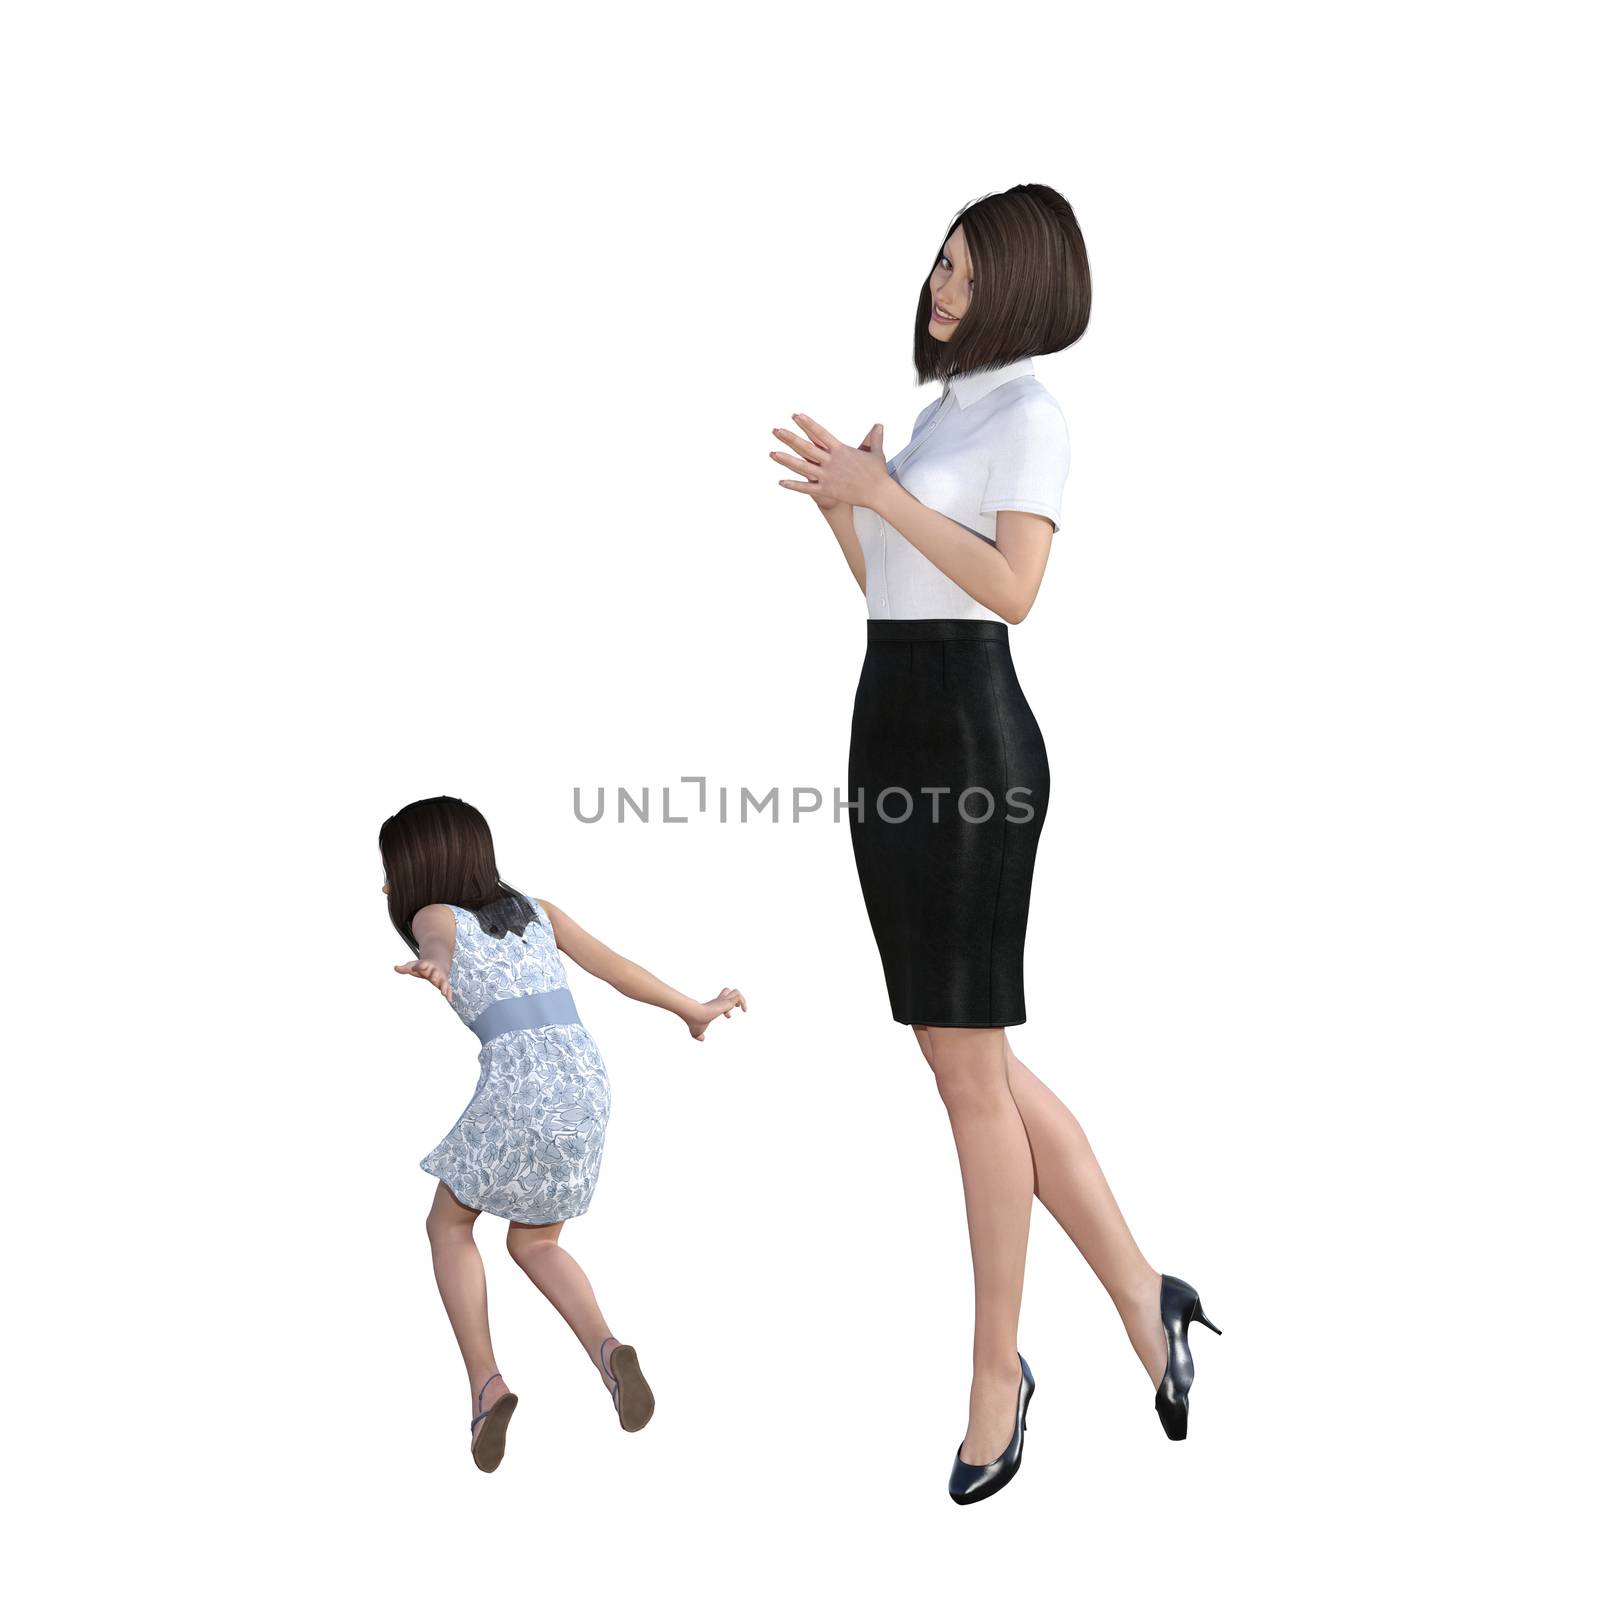 Mother Daughter Interaction of Helping With Chores as an Illustration Concept